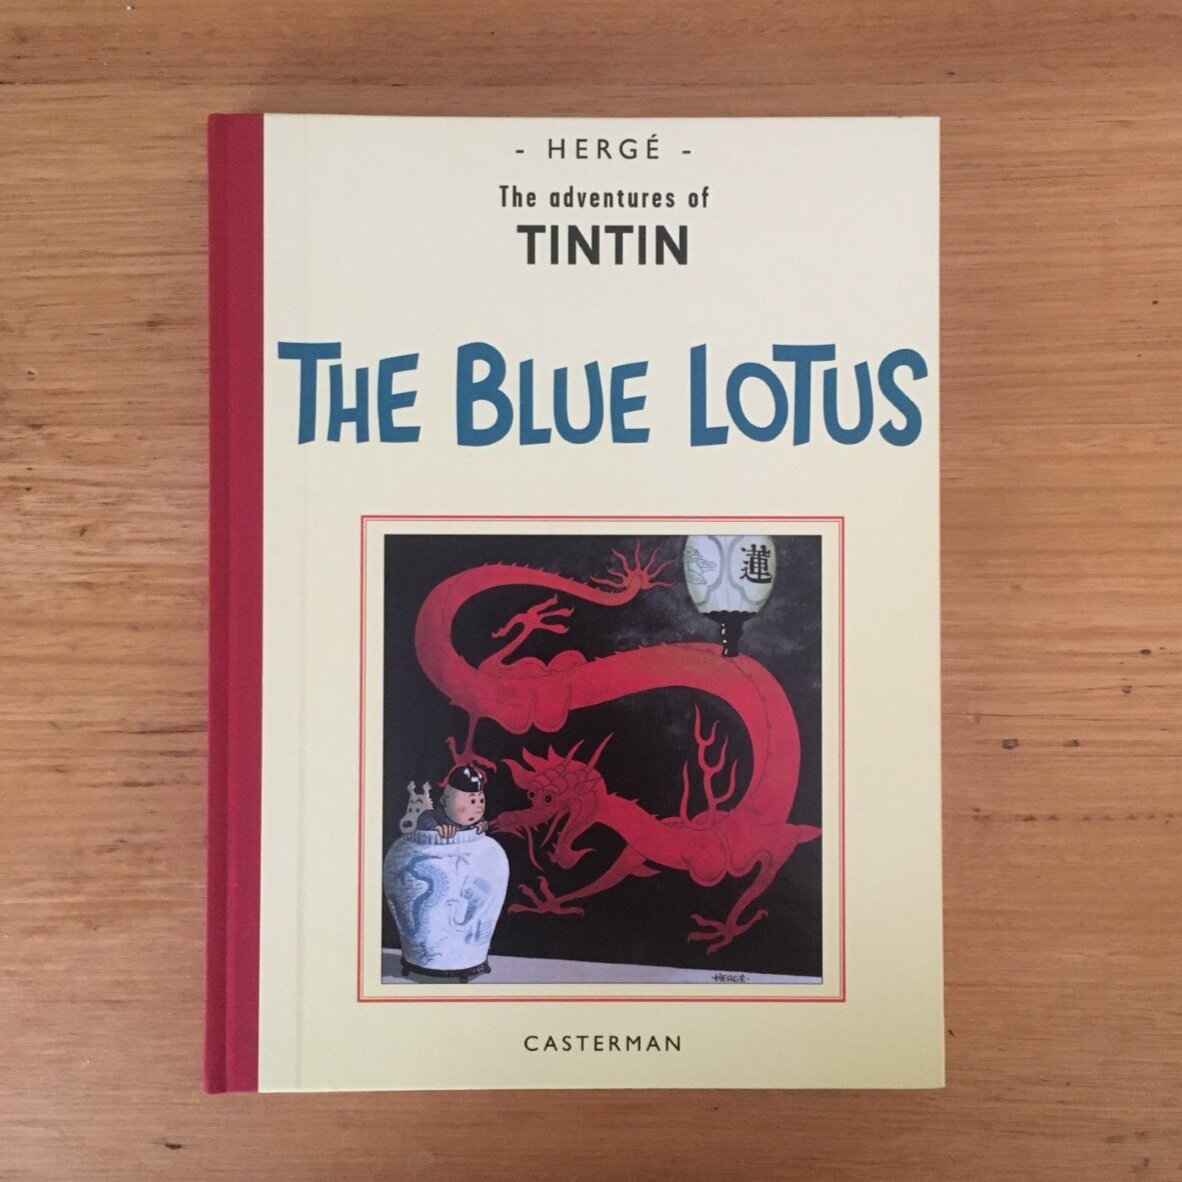  This facsimile edition of ‘The Blue Lotus’ presents the album in its original black-and-white form. 